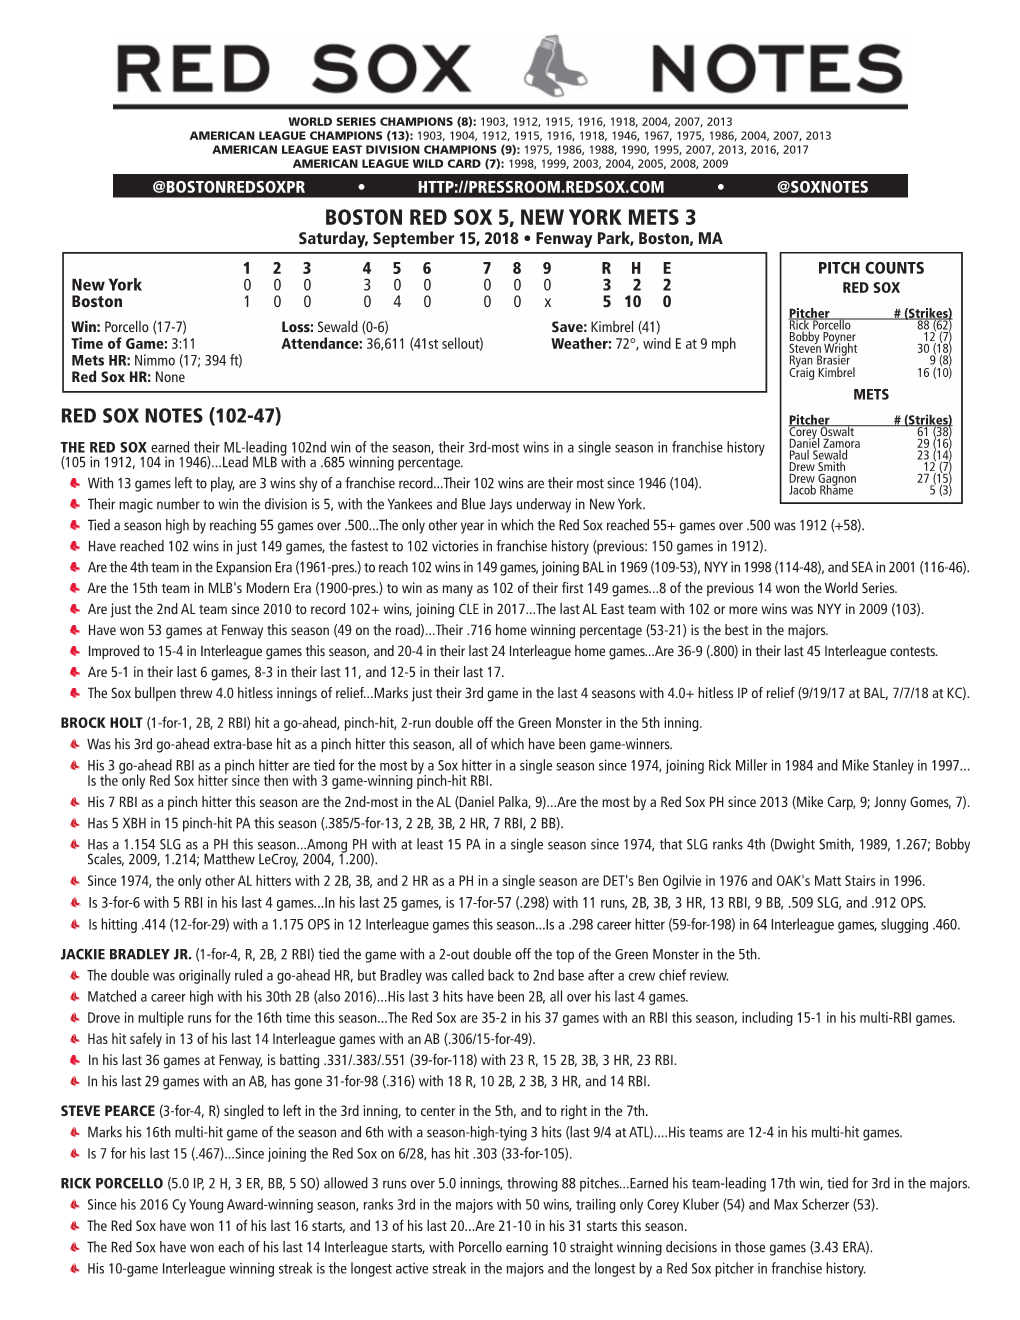 Post-Game Notes 9.15.18 Vs. NYM.Indd